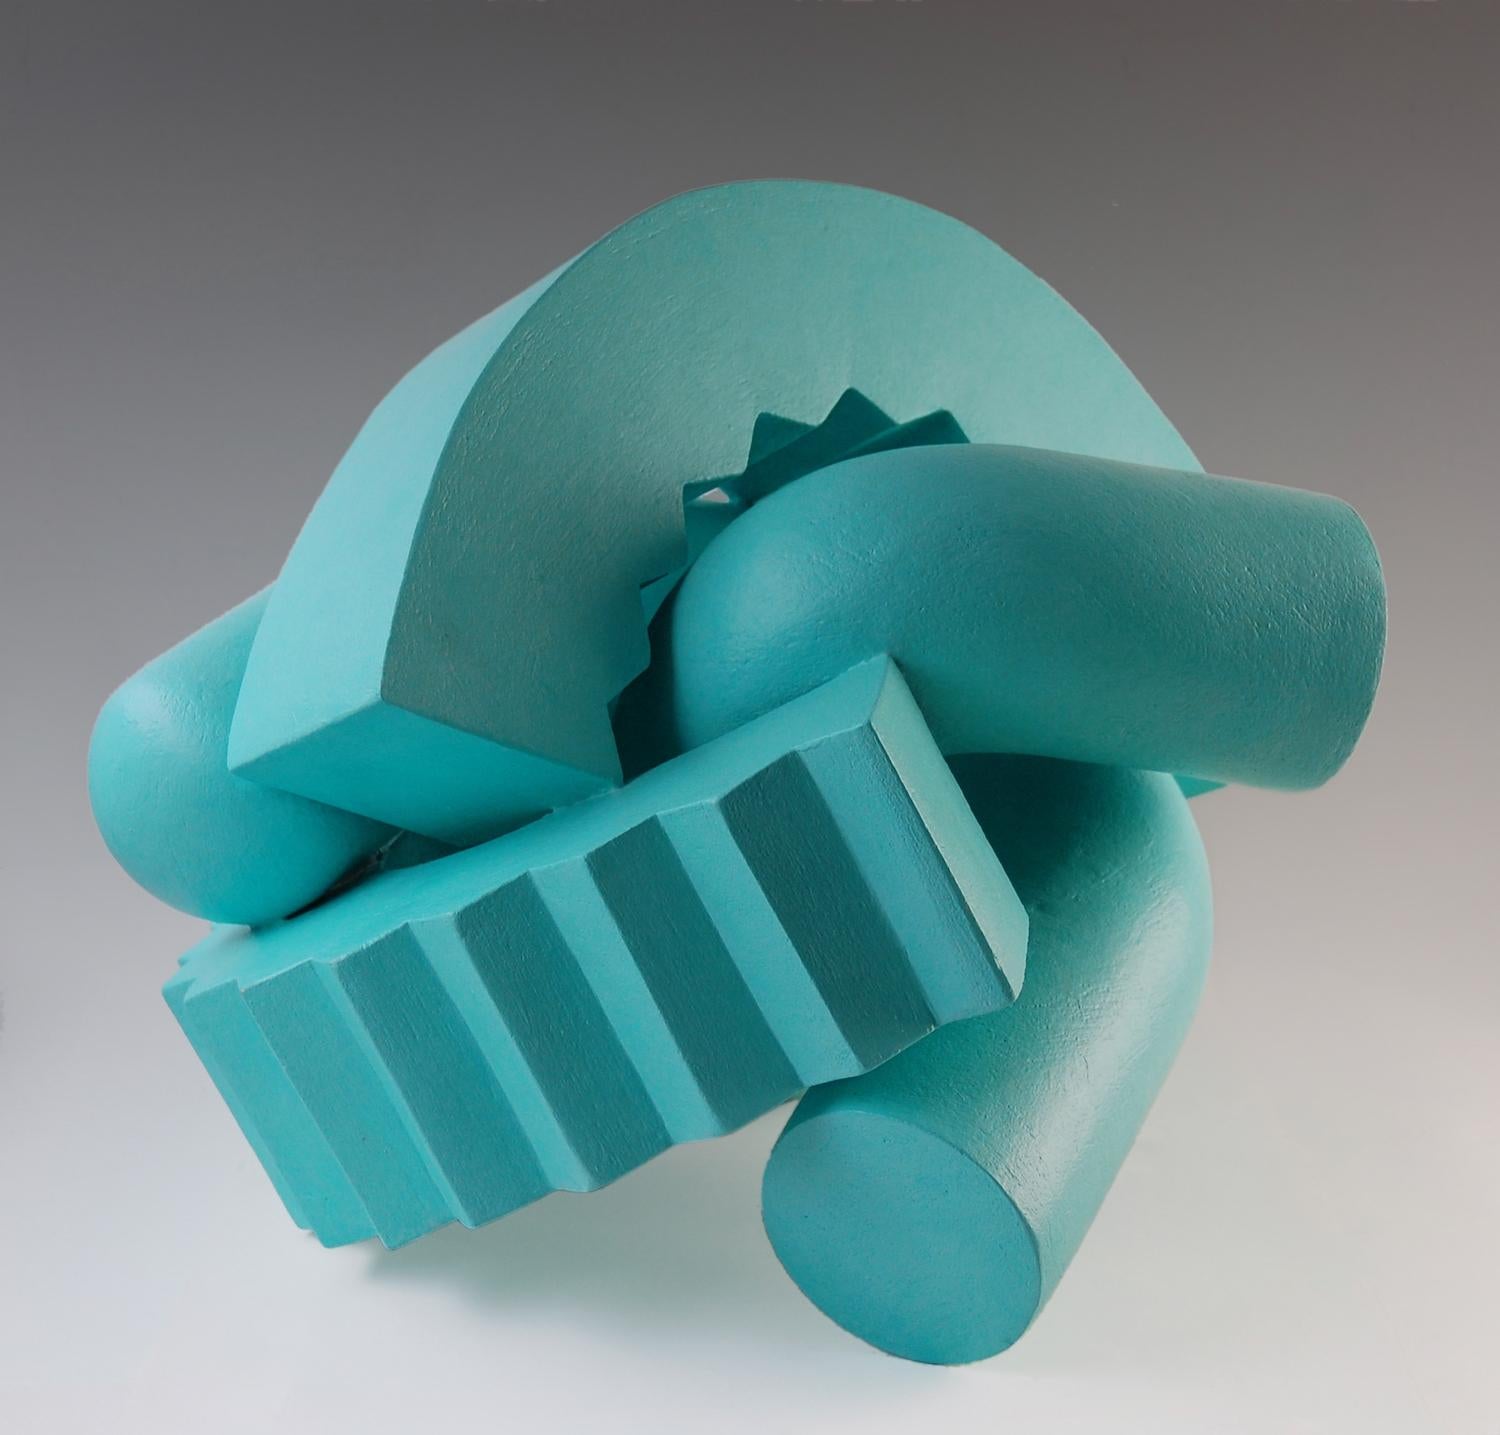 Cog (Teal) is a unique fired clay constructed and painted sculpture by contemporary artist Patricia Volk, dimensions are 40 × 50 × 50 cm (15.7 × 19.7 × 19.7 in). 
The sculpture is signed and comes with a certificate of authenticity. 

Abstract